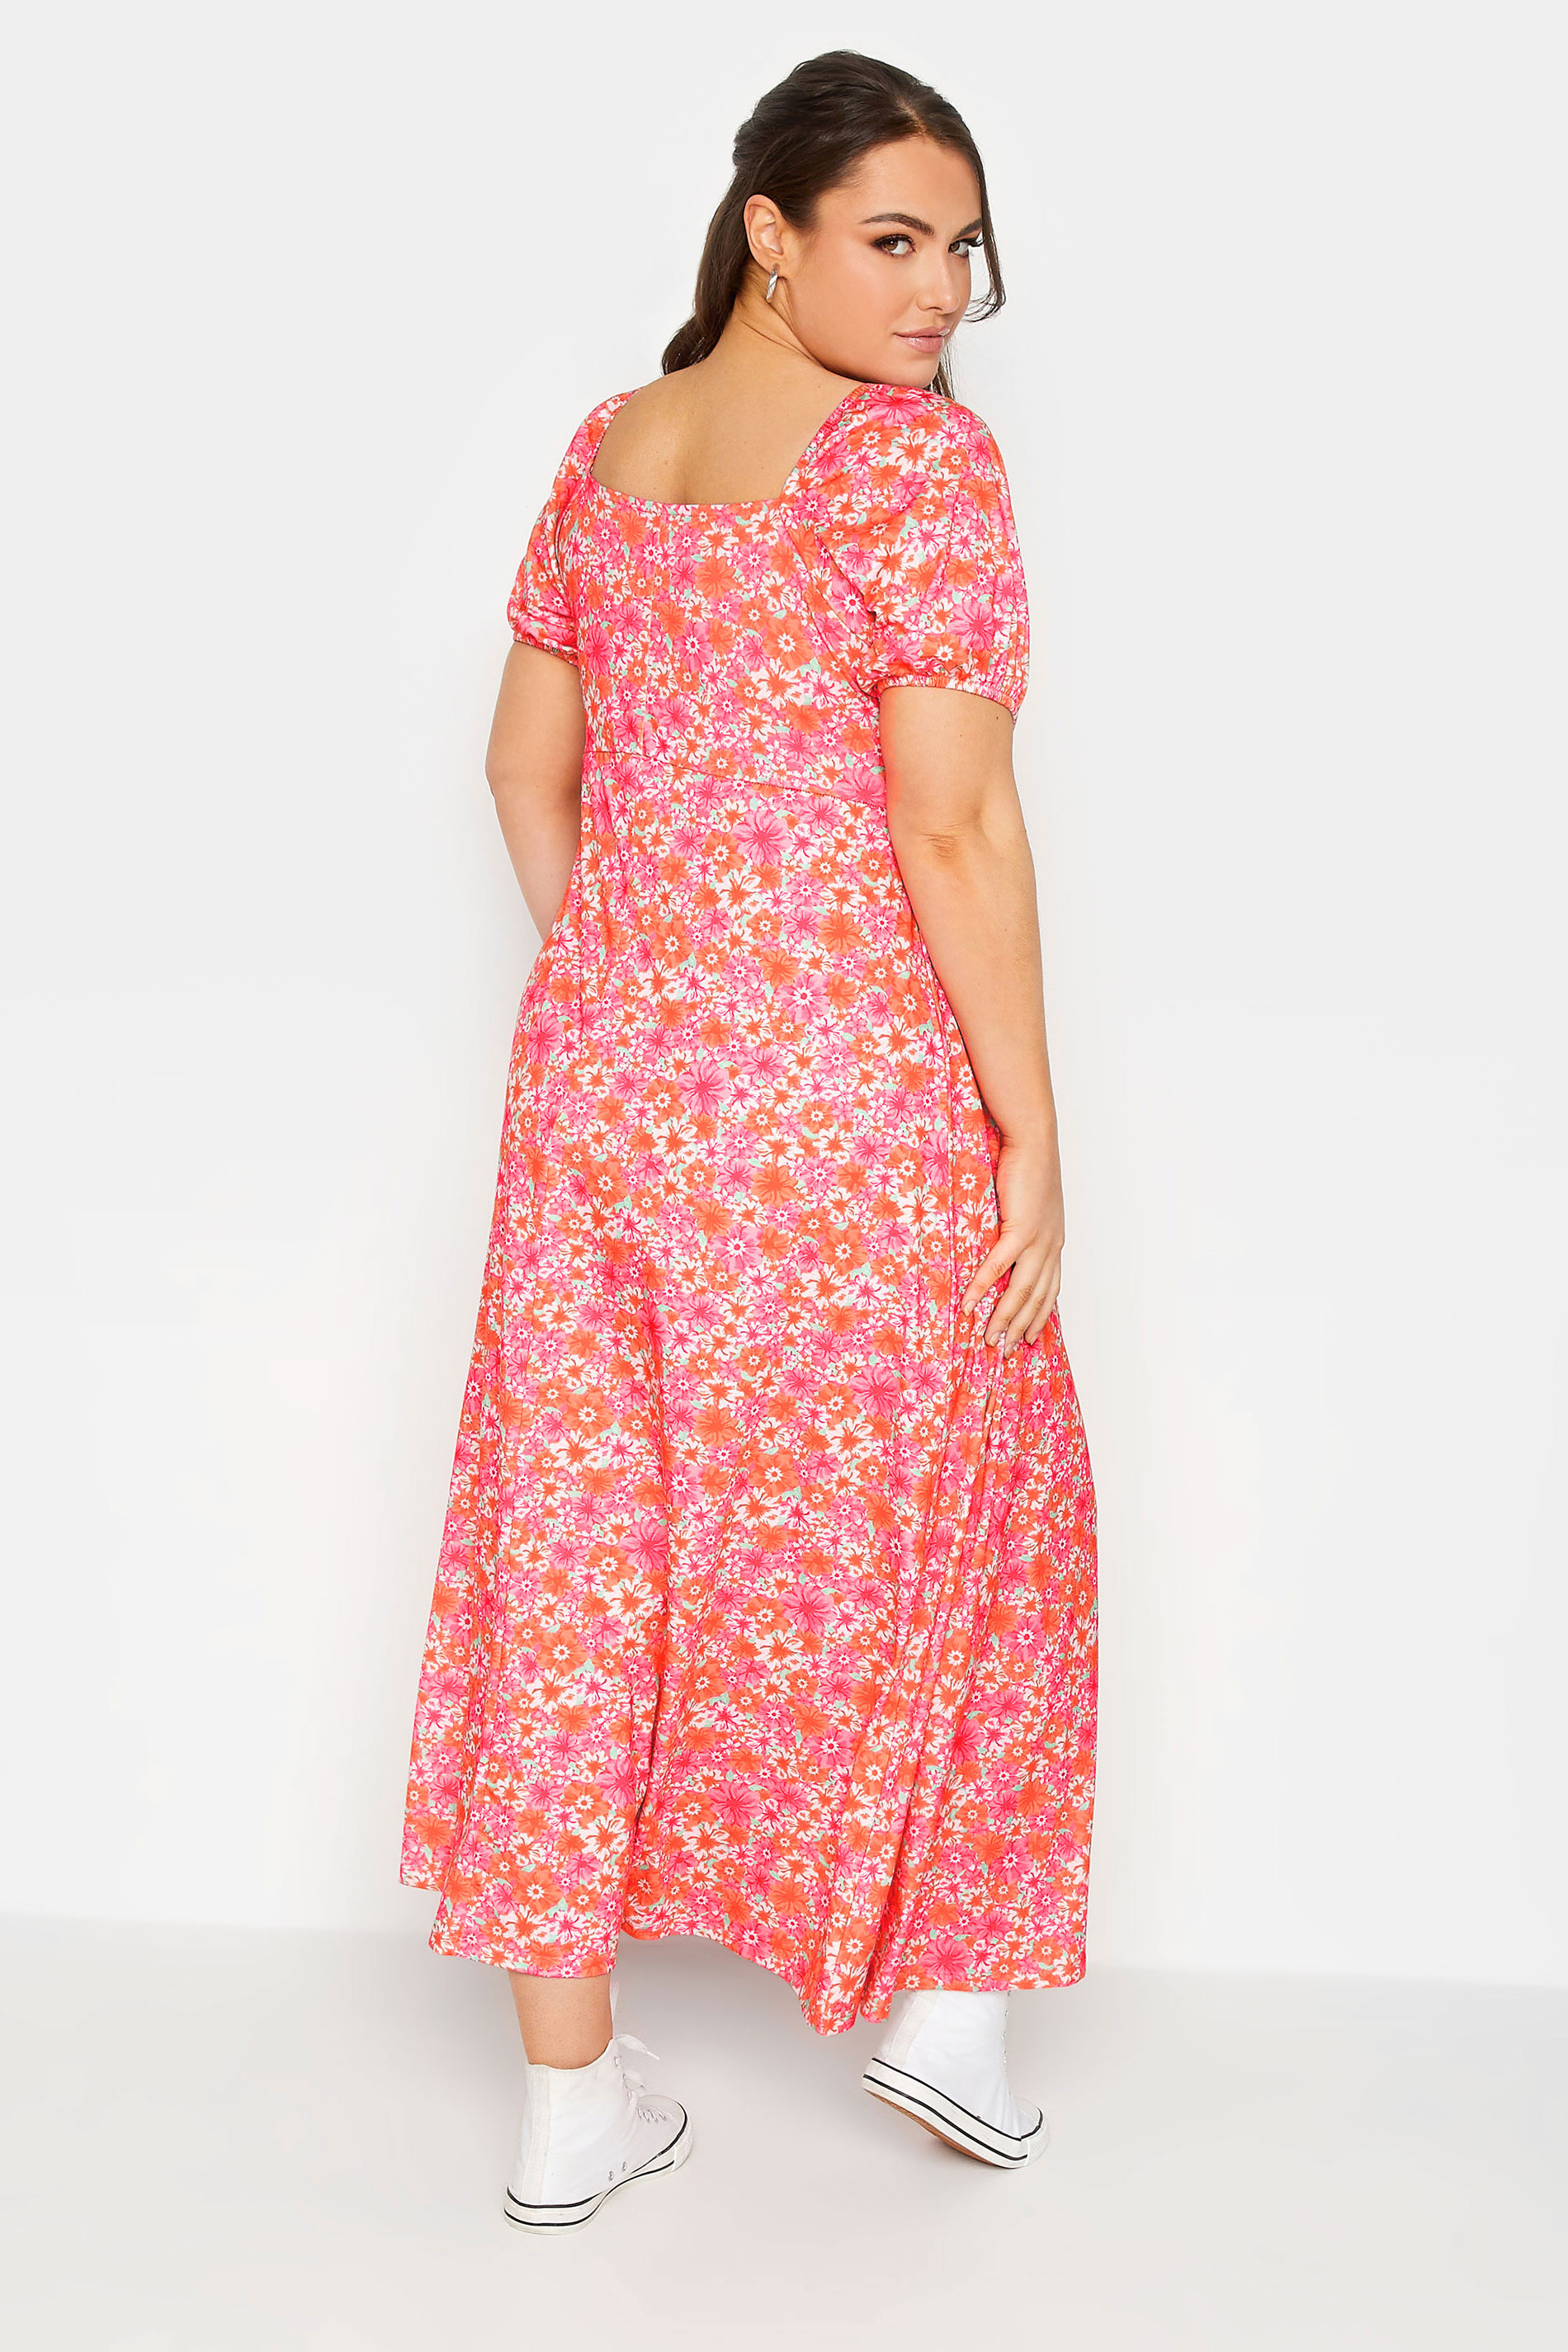 LIMITED COLLECTION Curve Plus Size Pink Floral Wrap Maxi Dress | Yours Clothing  3